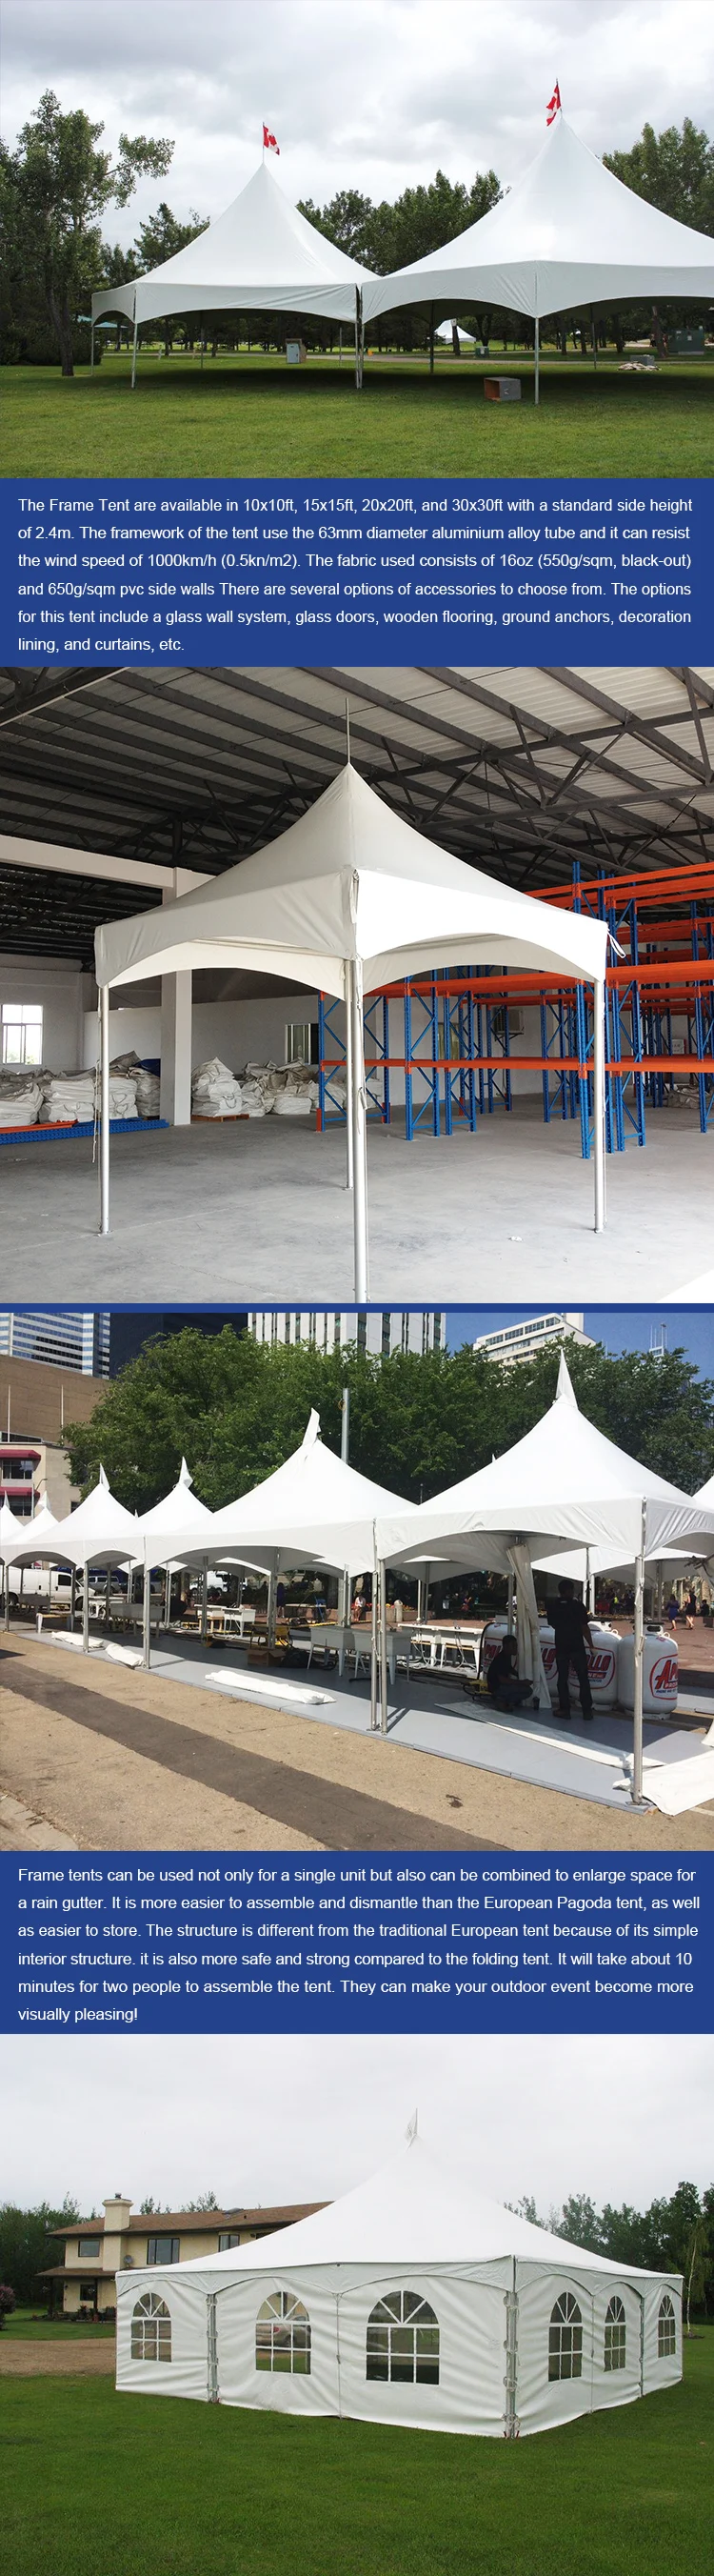 China Promotional Branded canopy 20 x 20 Folding canopy Tent